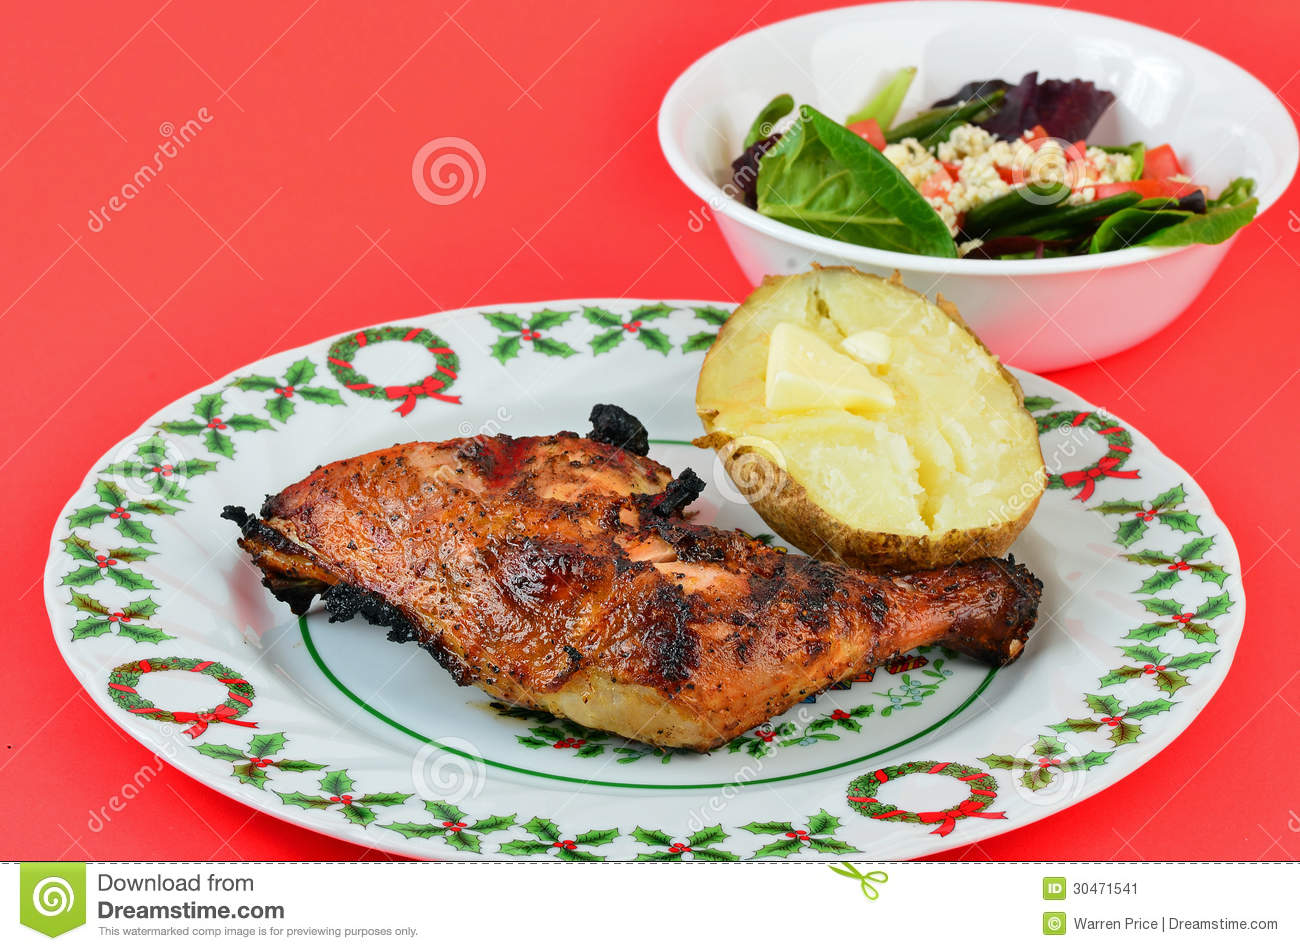 Grilled Chicken Thigh And Leg On Christmas Plate With Baked Potato And